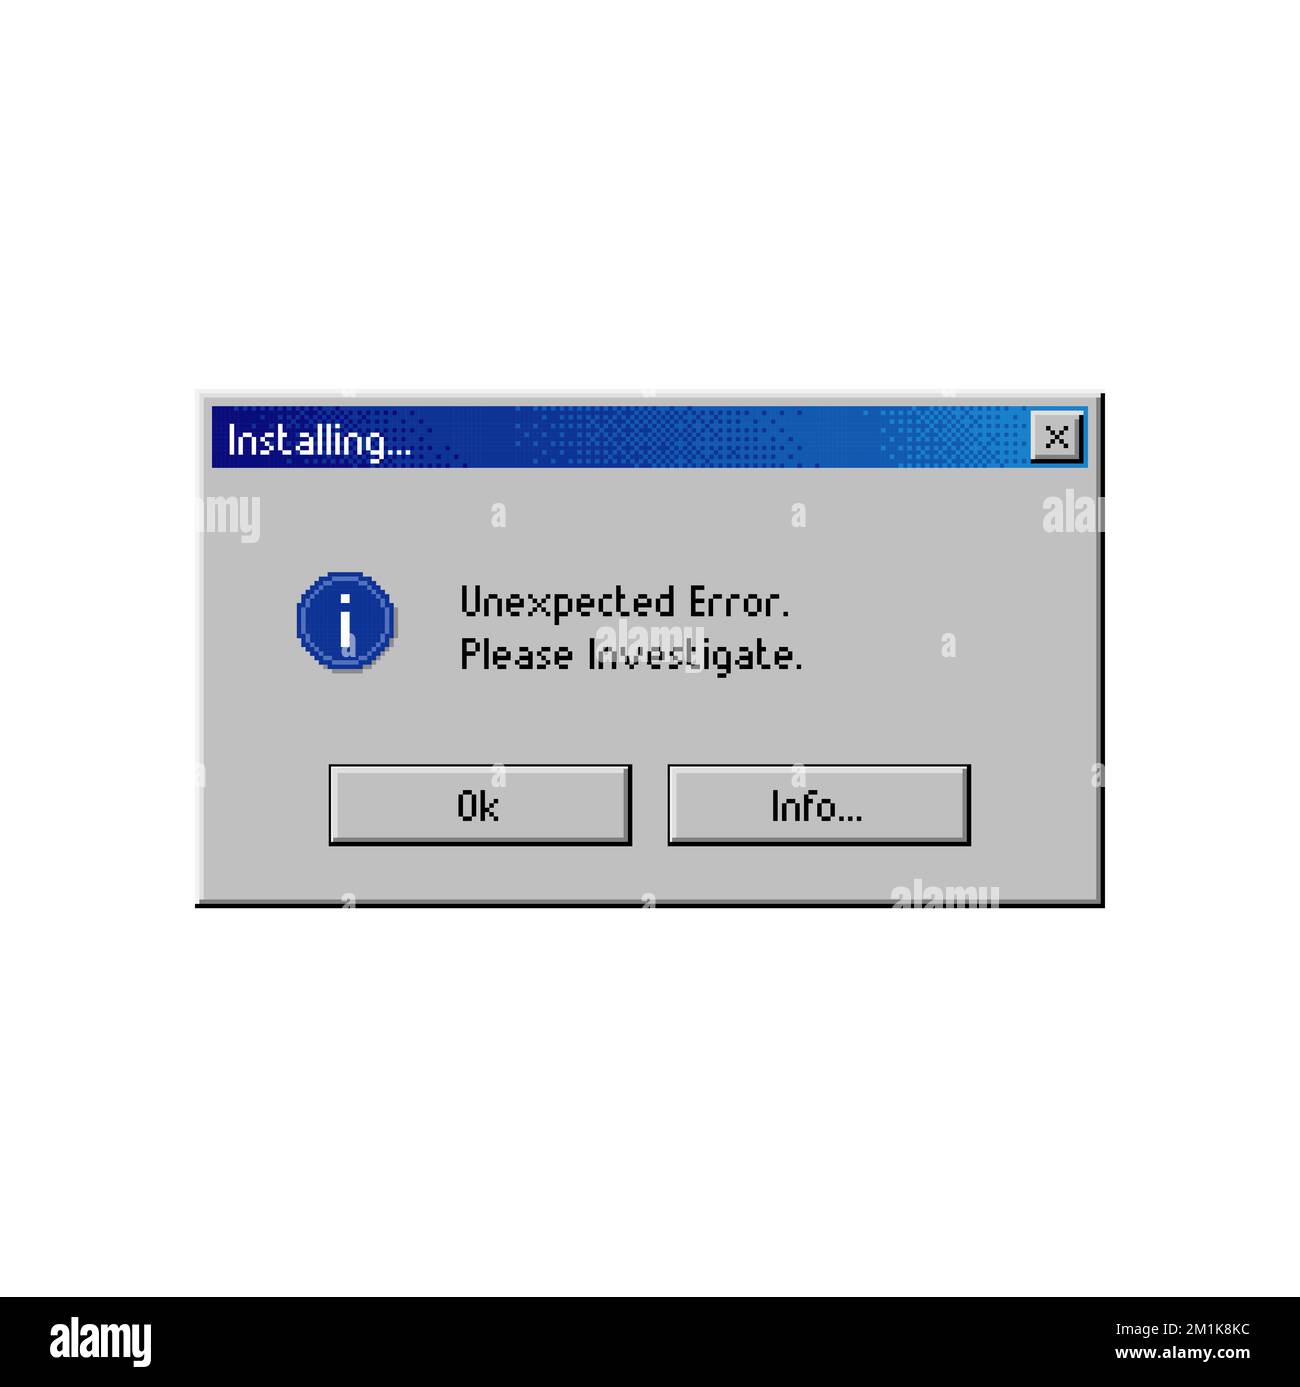 Error pop up window, computer message with unexpected error on installing, vector retro tab. Unexpected error message window of internet or PC installation with buttons, browser alert interface Stock Vector